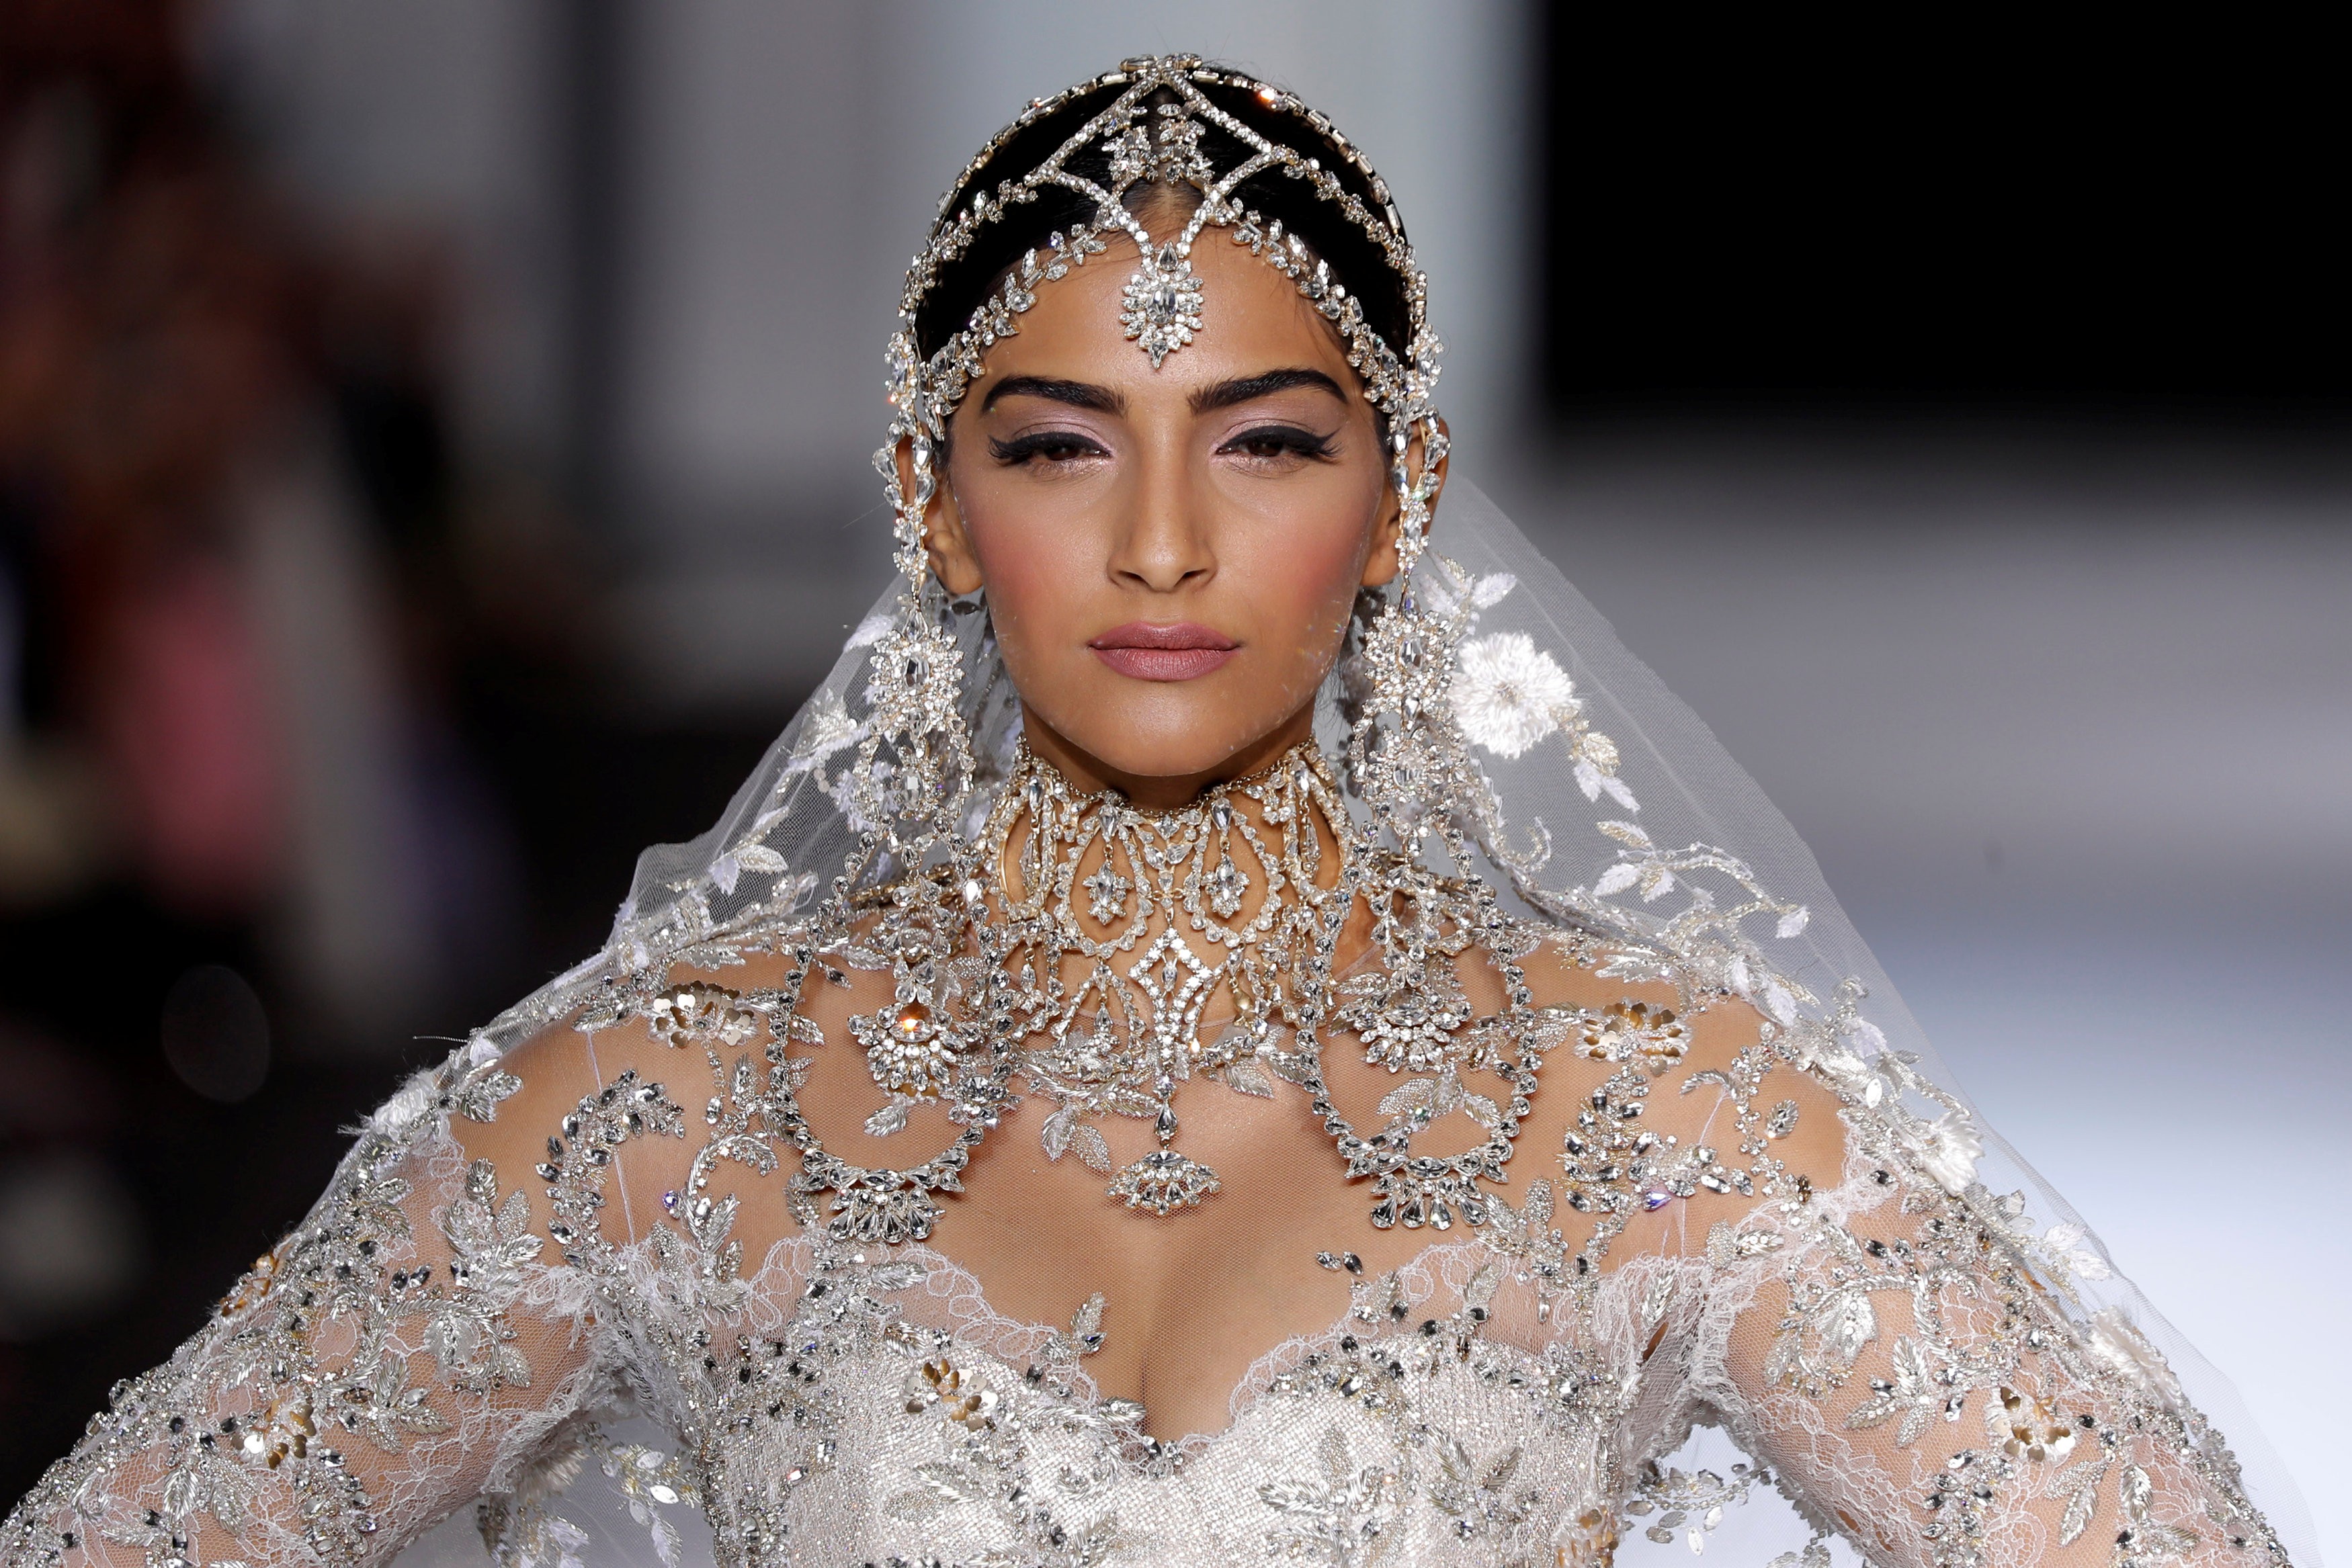 Sonam Kapoor presents a wedding dress by Ralph & Russo as part of their Haute Couture Fall/Winter 2017/2018 collection. Photo: REUTERS